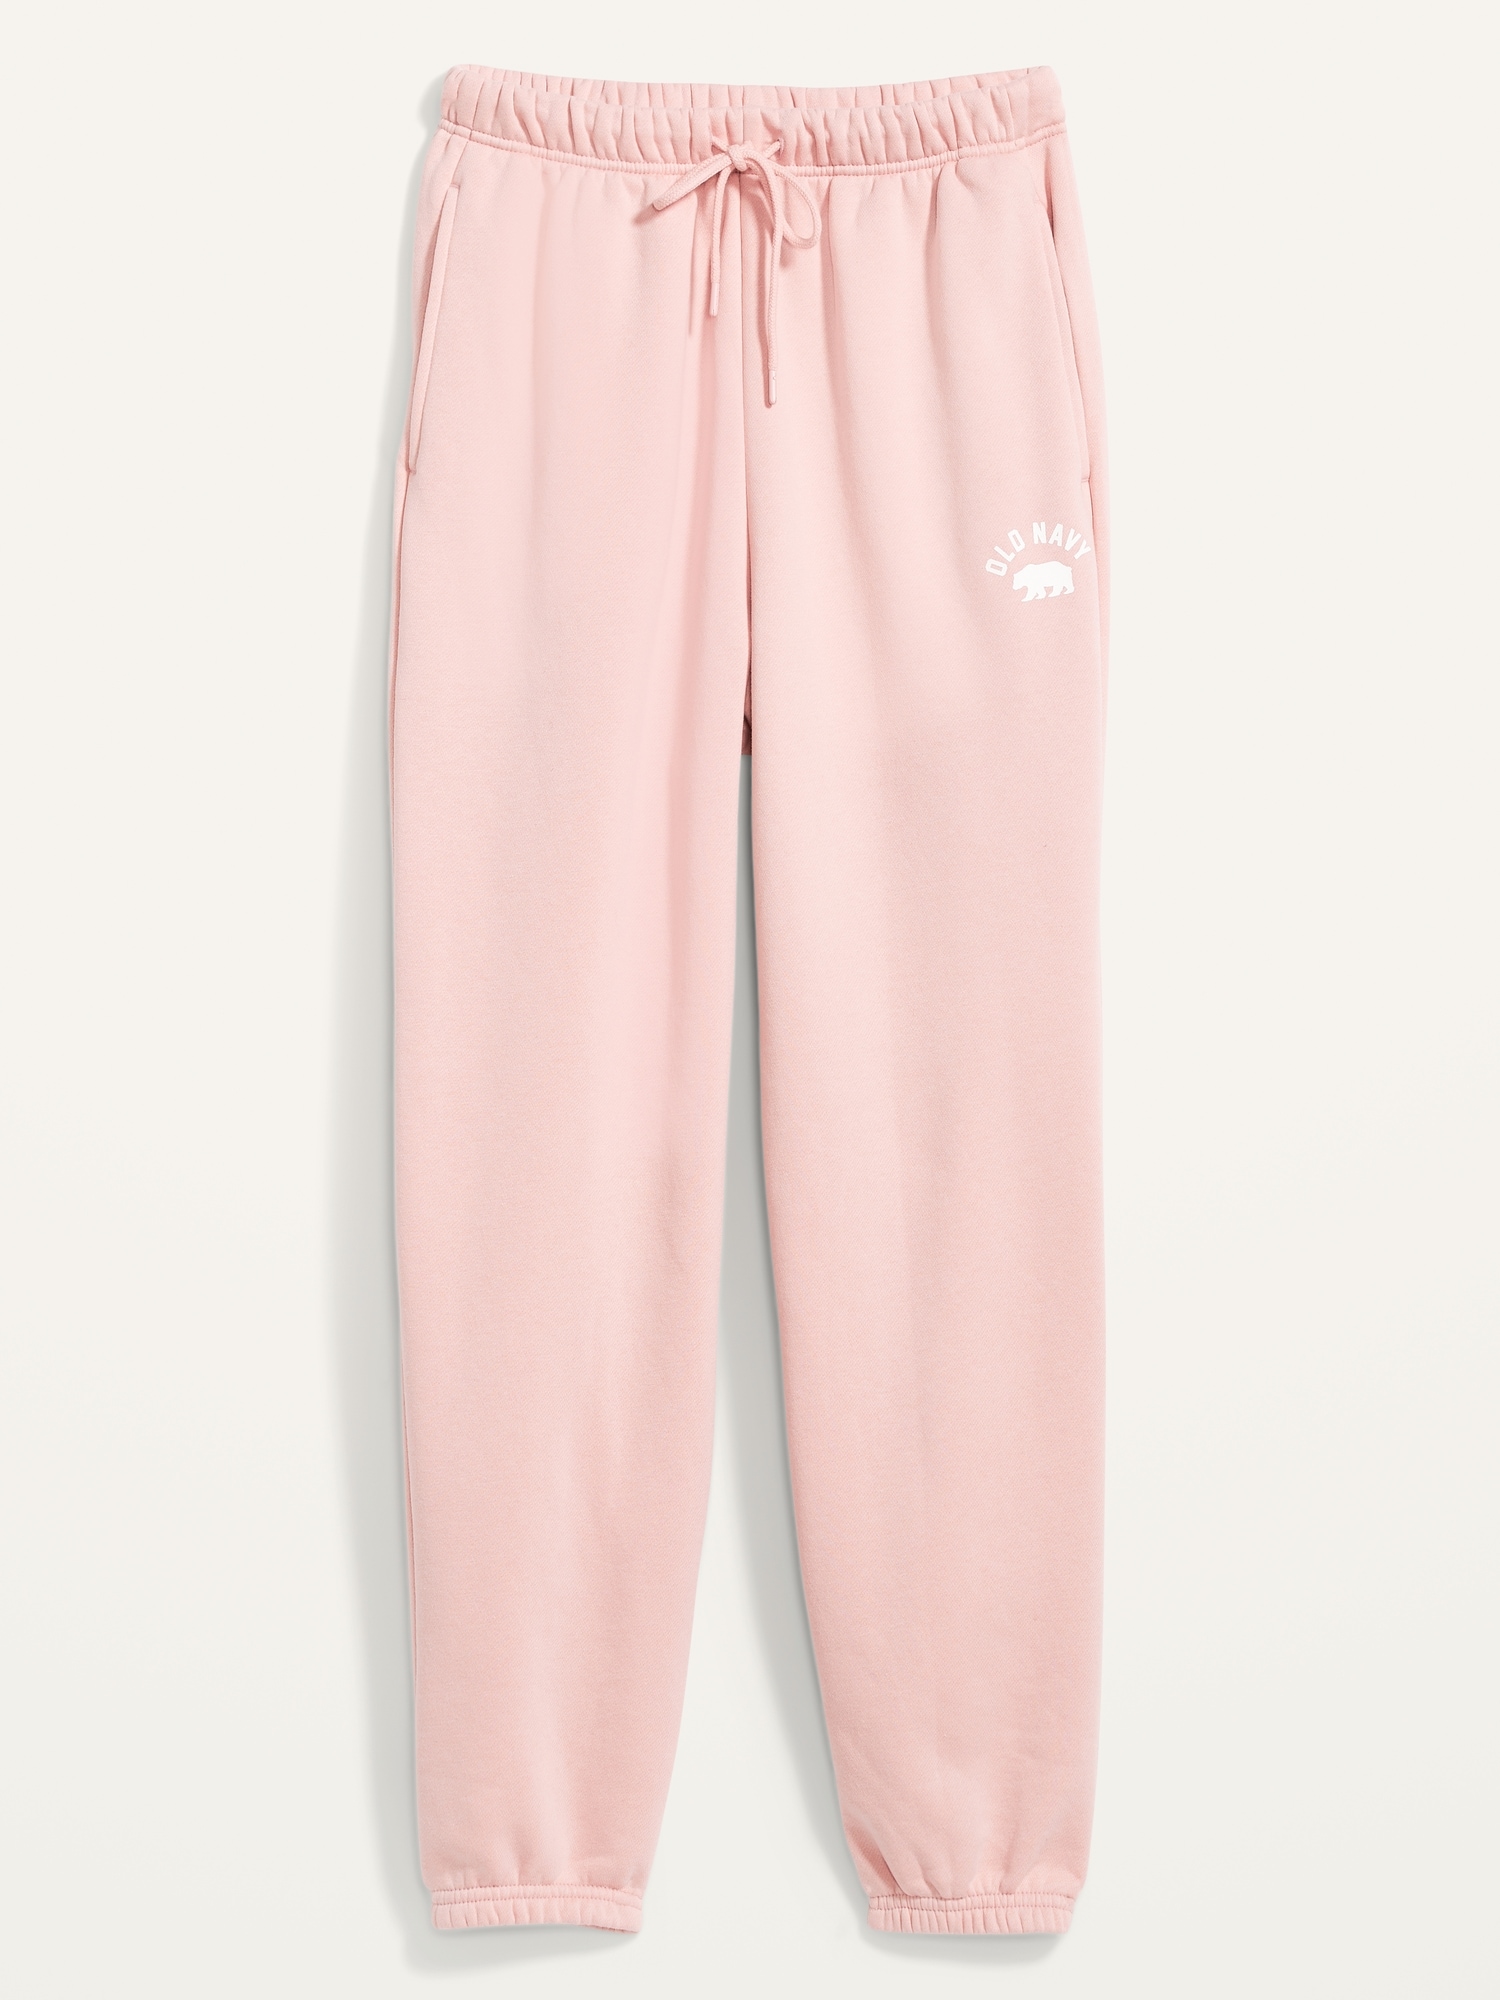 Baggy Sweatpants for Women Tall Plus Size y2k Long Women's High Waisted  Baggy Jogger Sweatpants Lounge Athletic Pants, Pink, Medium : :  Clothing, Shoes & Accessories